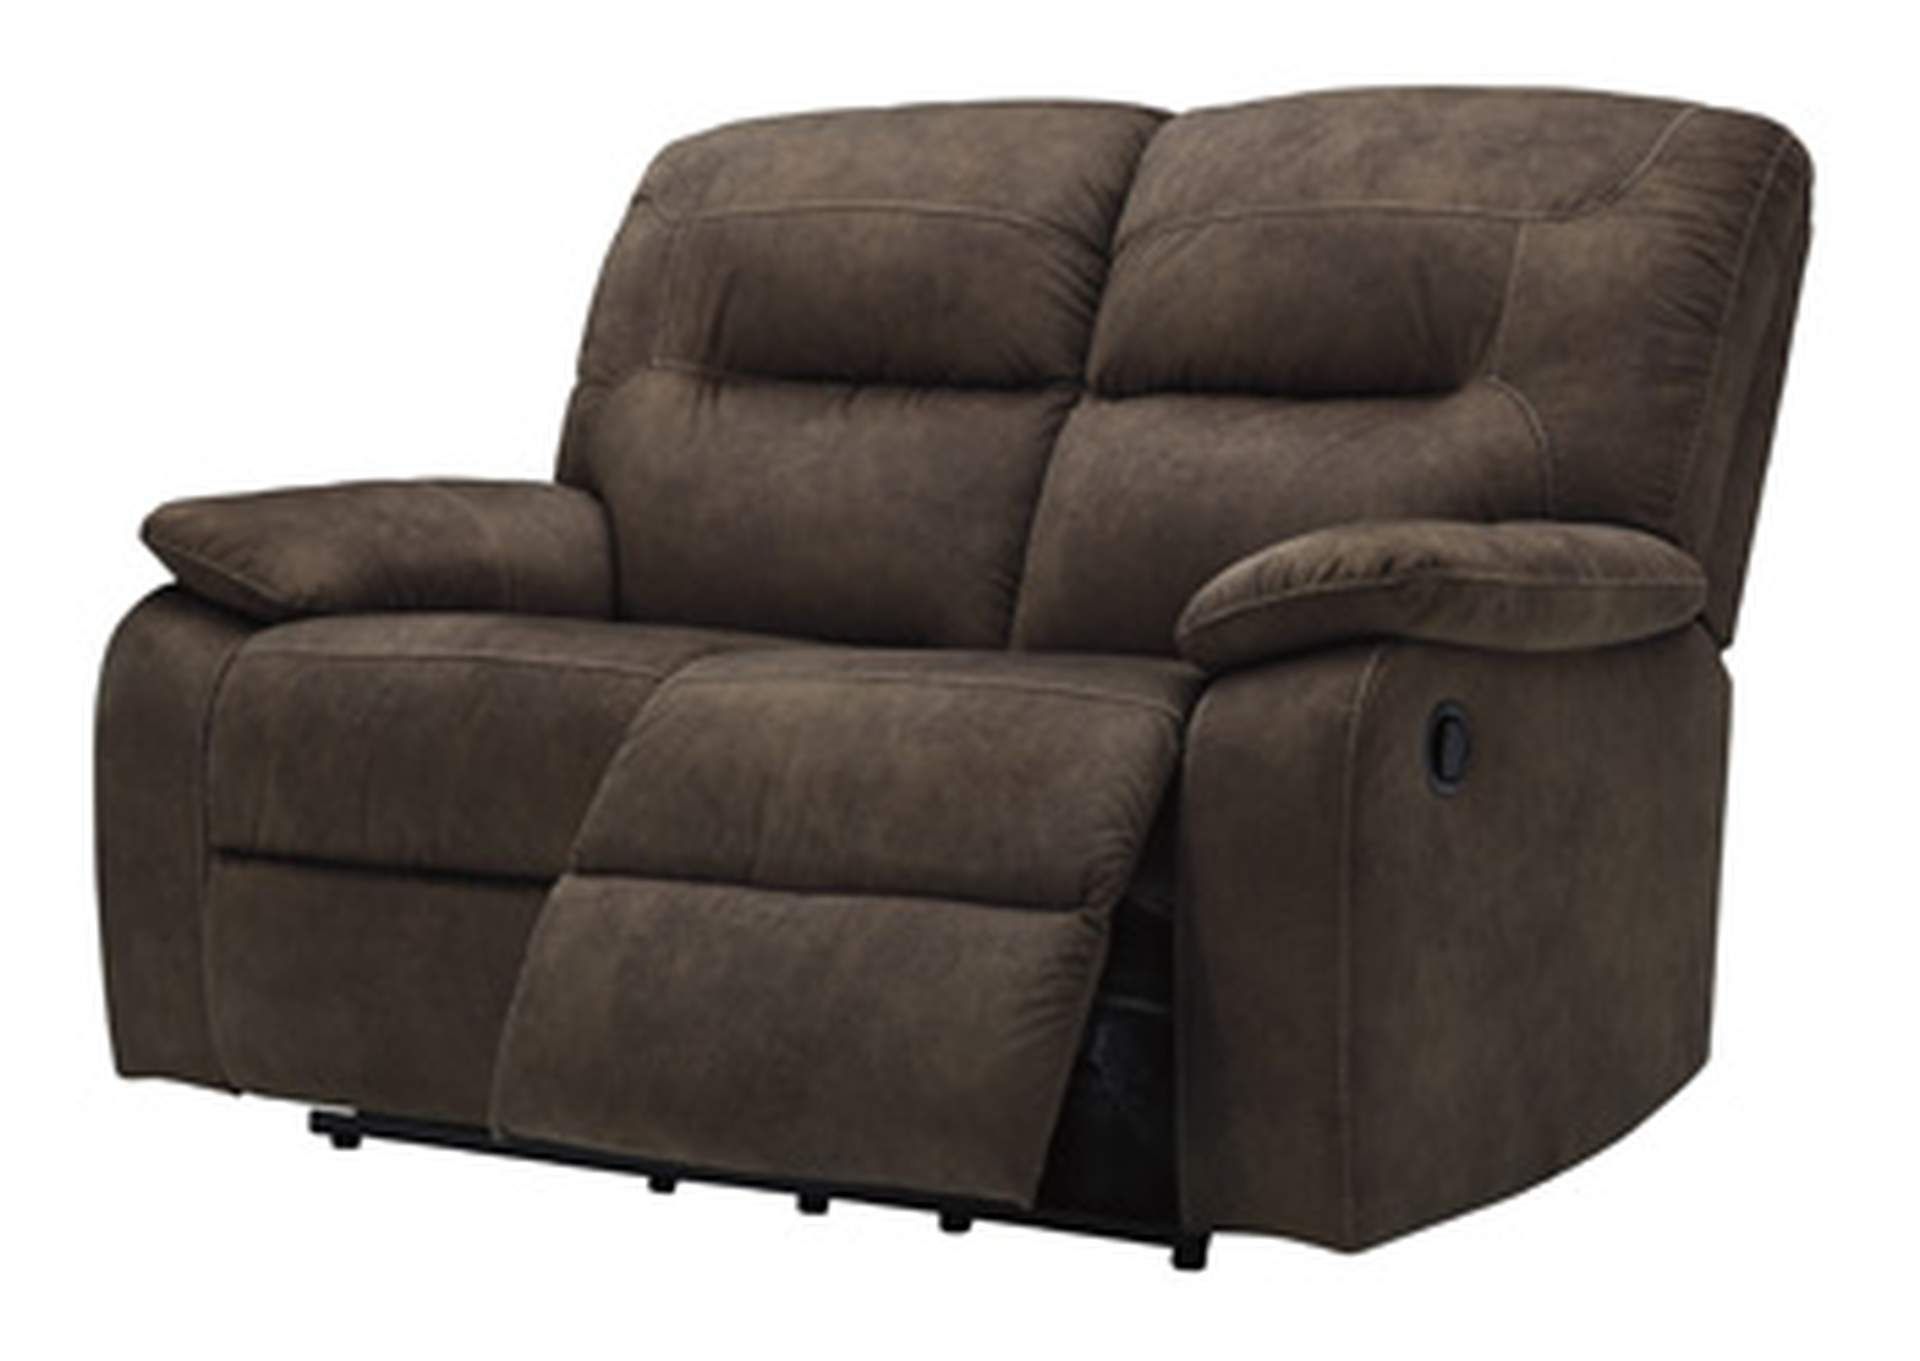 Brown/beige Bolzano Reclining Loveseat Spiller Furniture & Mattress With Regard To Round Beige Faux Leather Ottomans With Pull Tab (View 6 of 20)